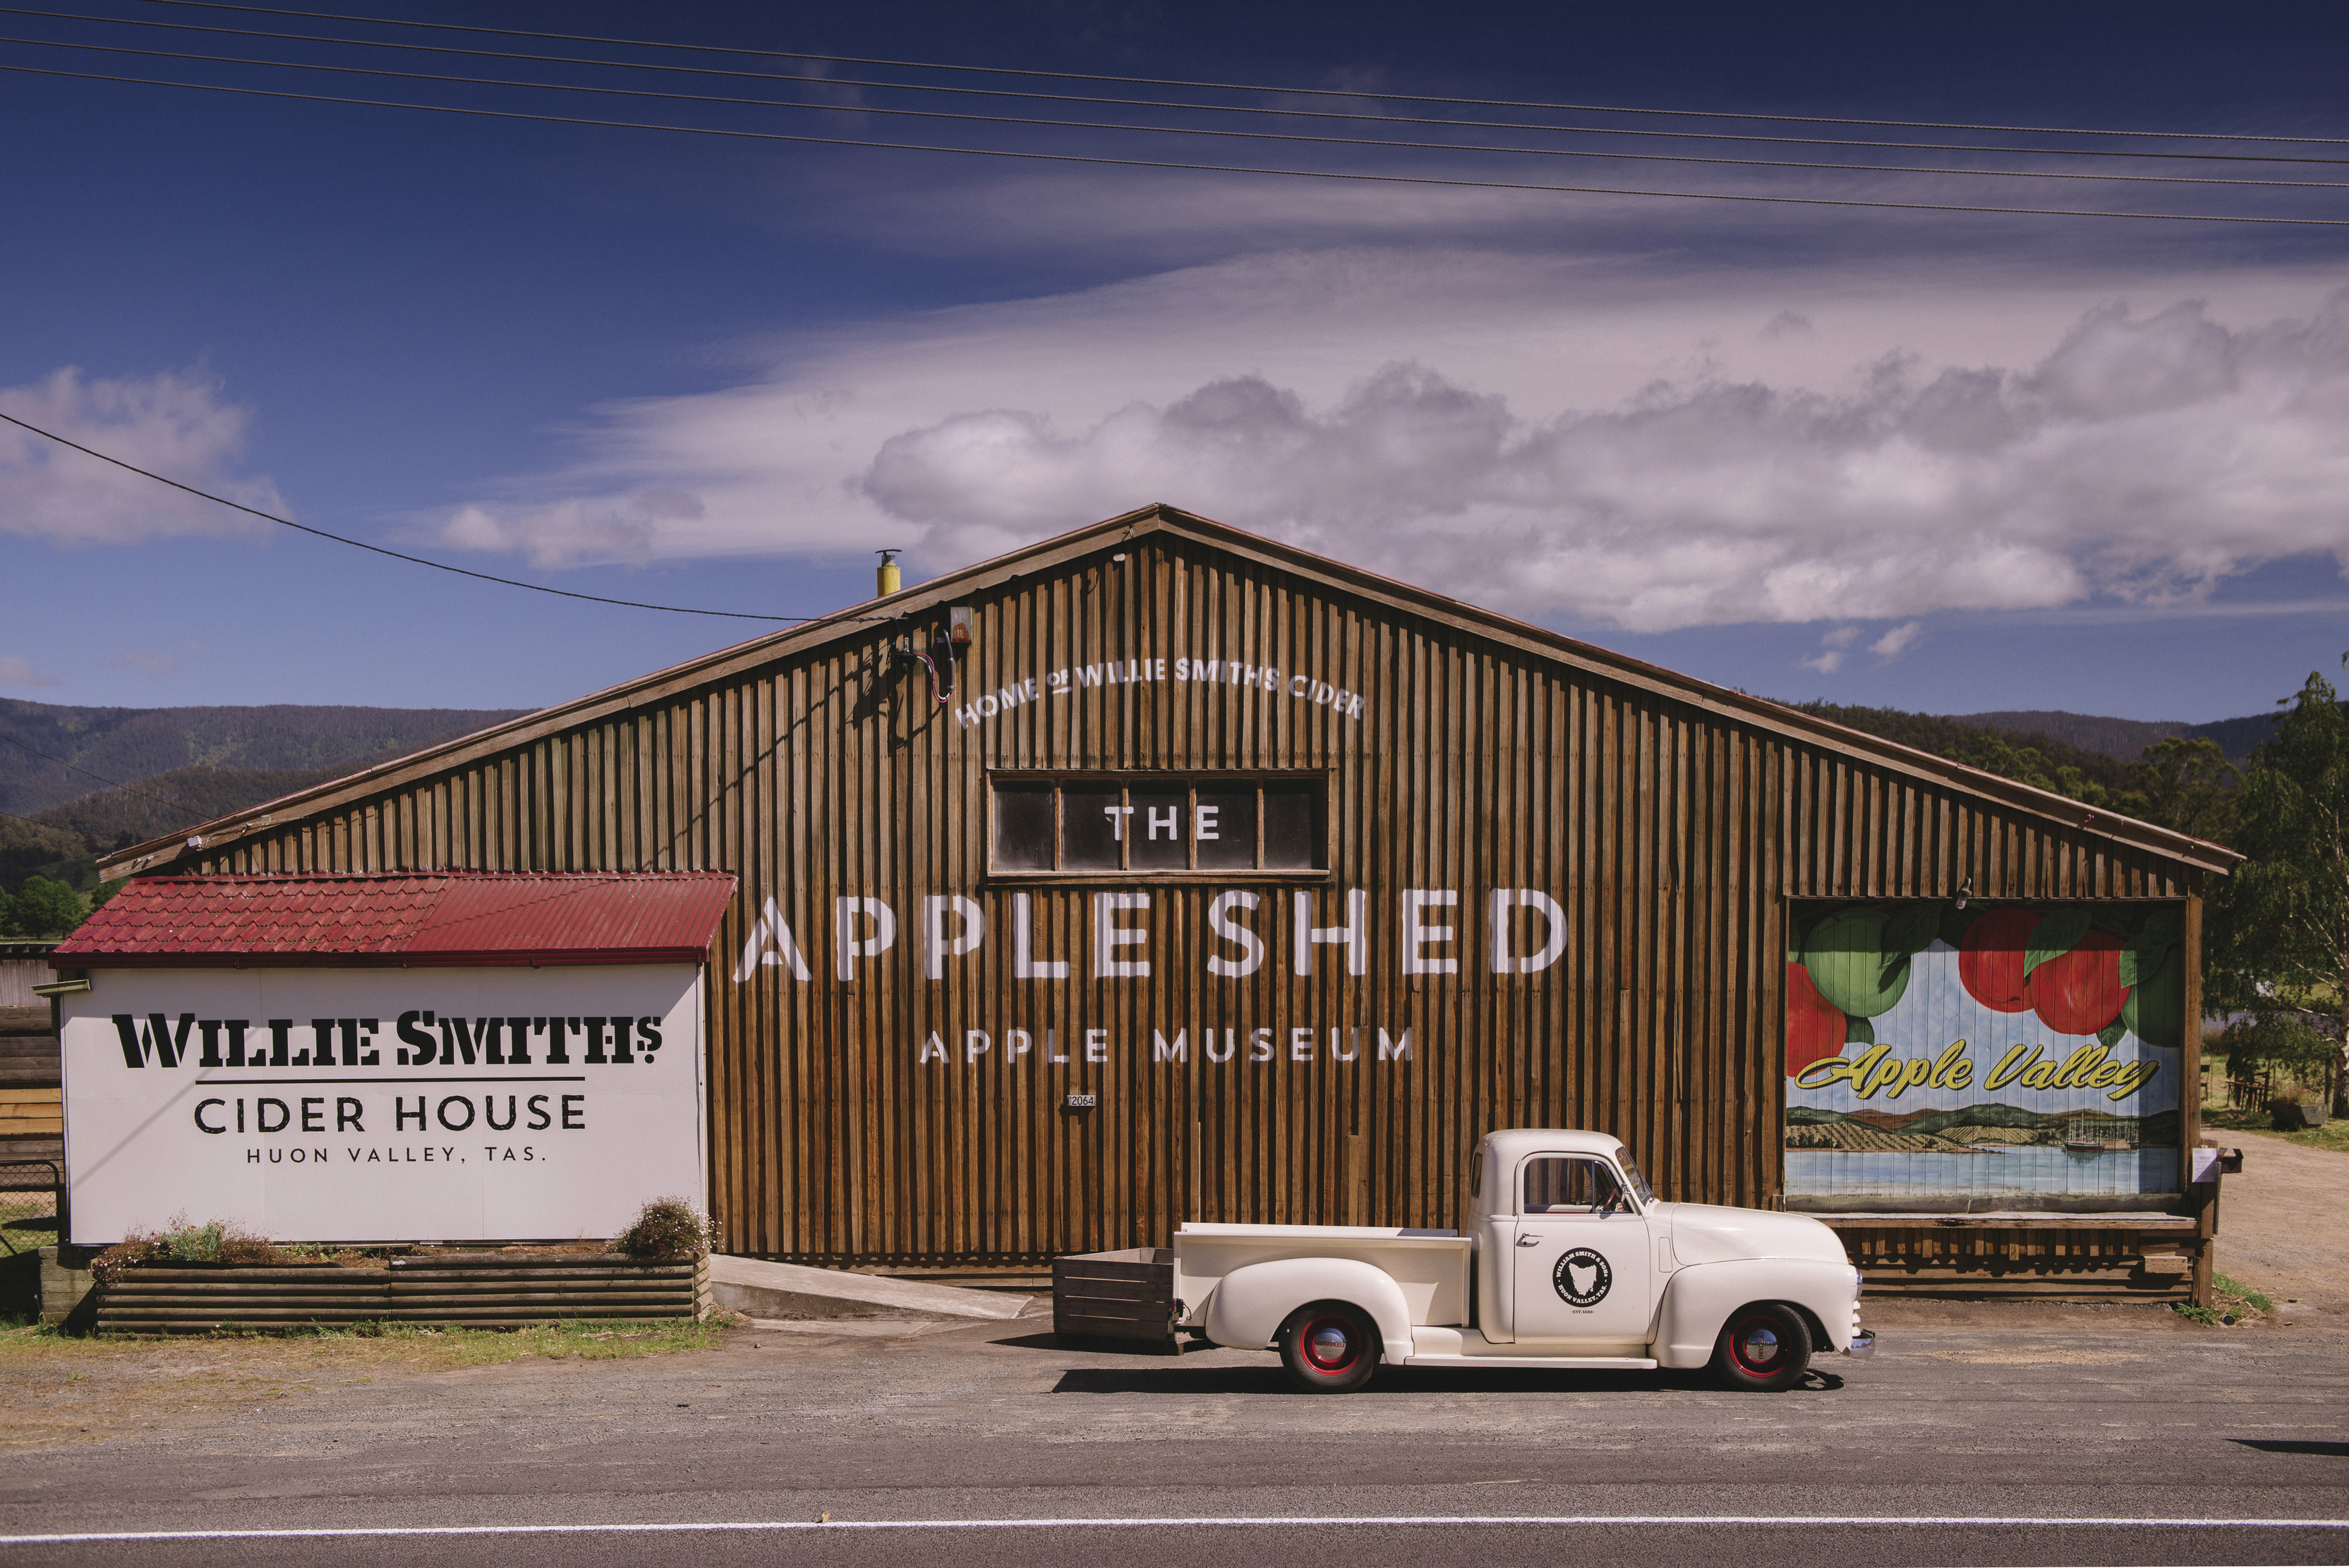 Australia’s first organic Cidery from the Huon Valley, where William Smith first planted his orchard in 1888. Willie Smiths Organic Apple Cider.